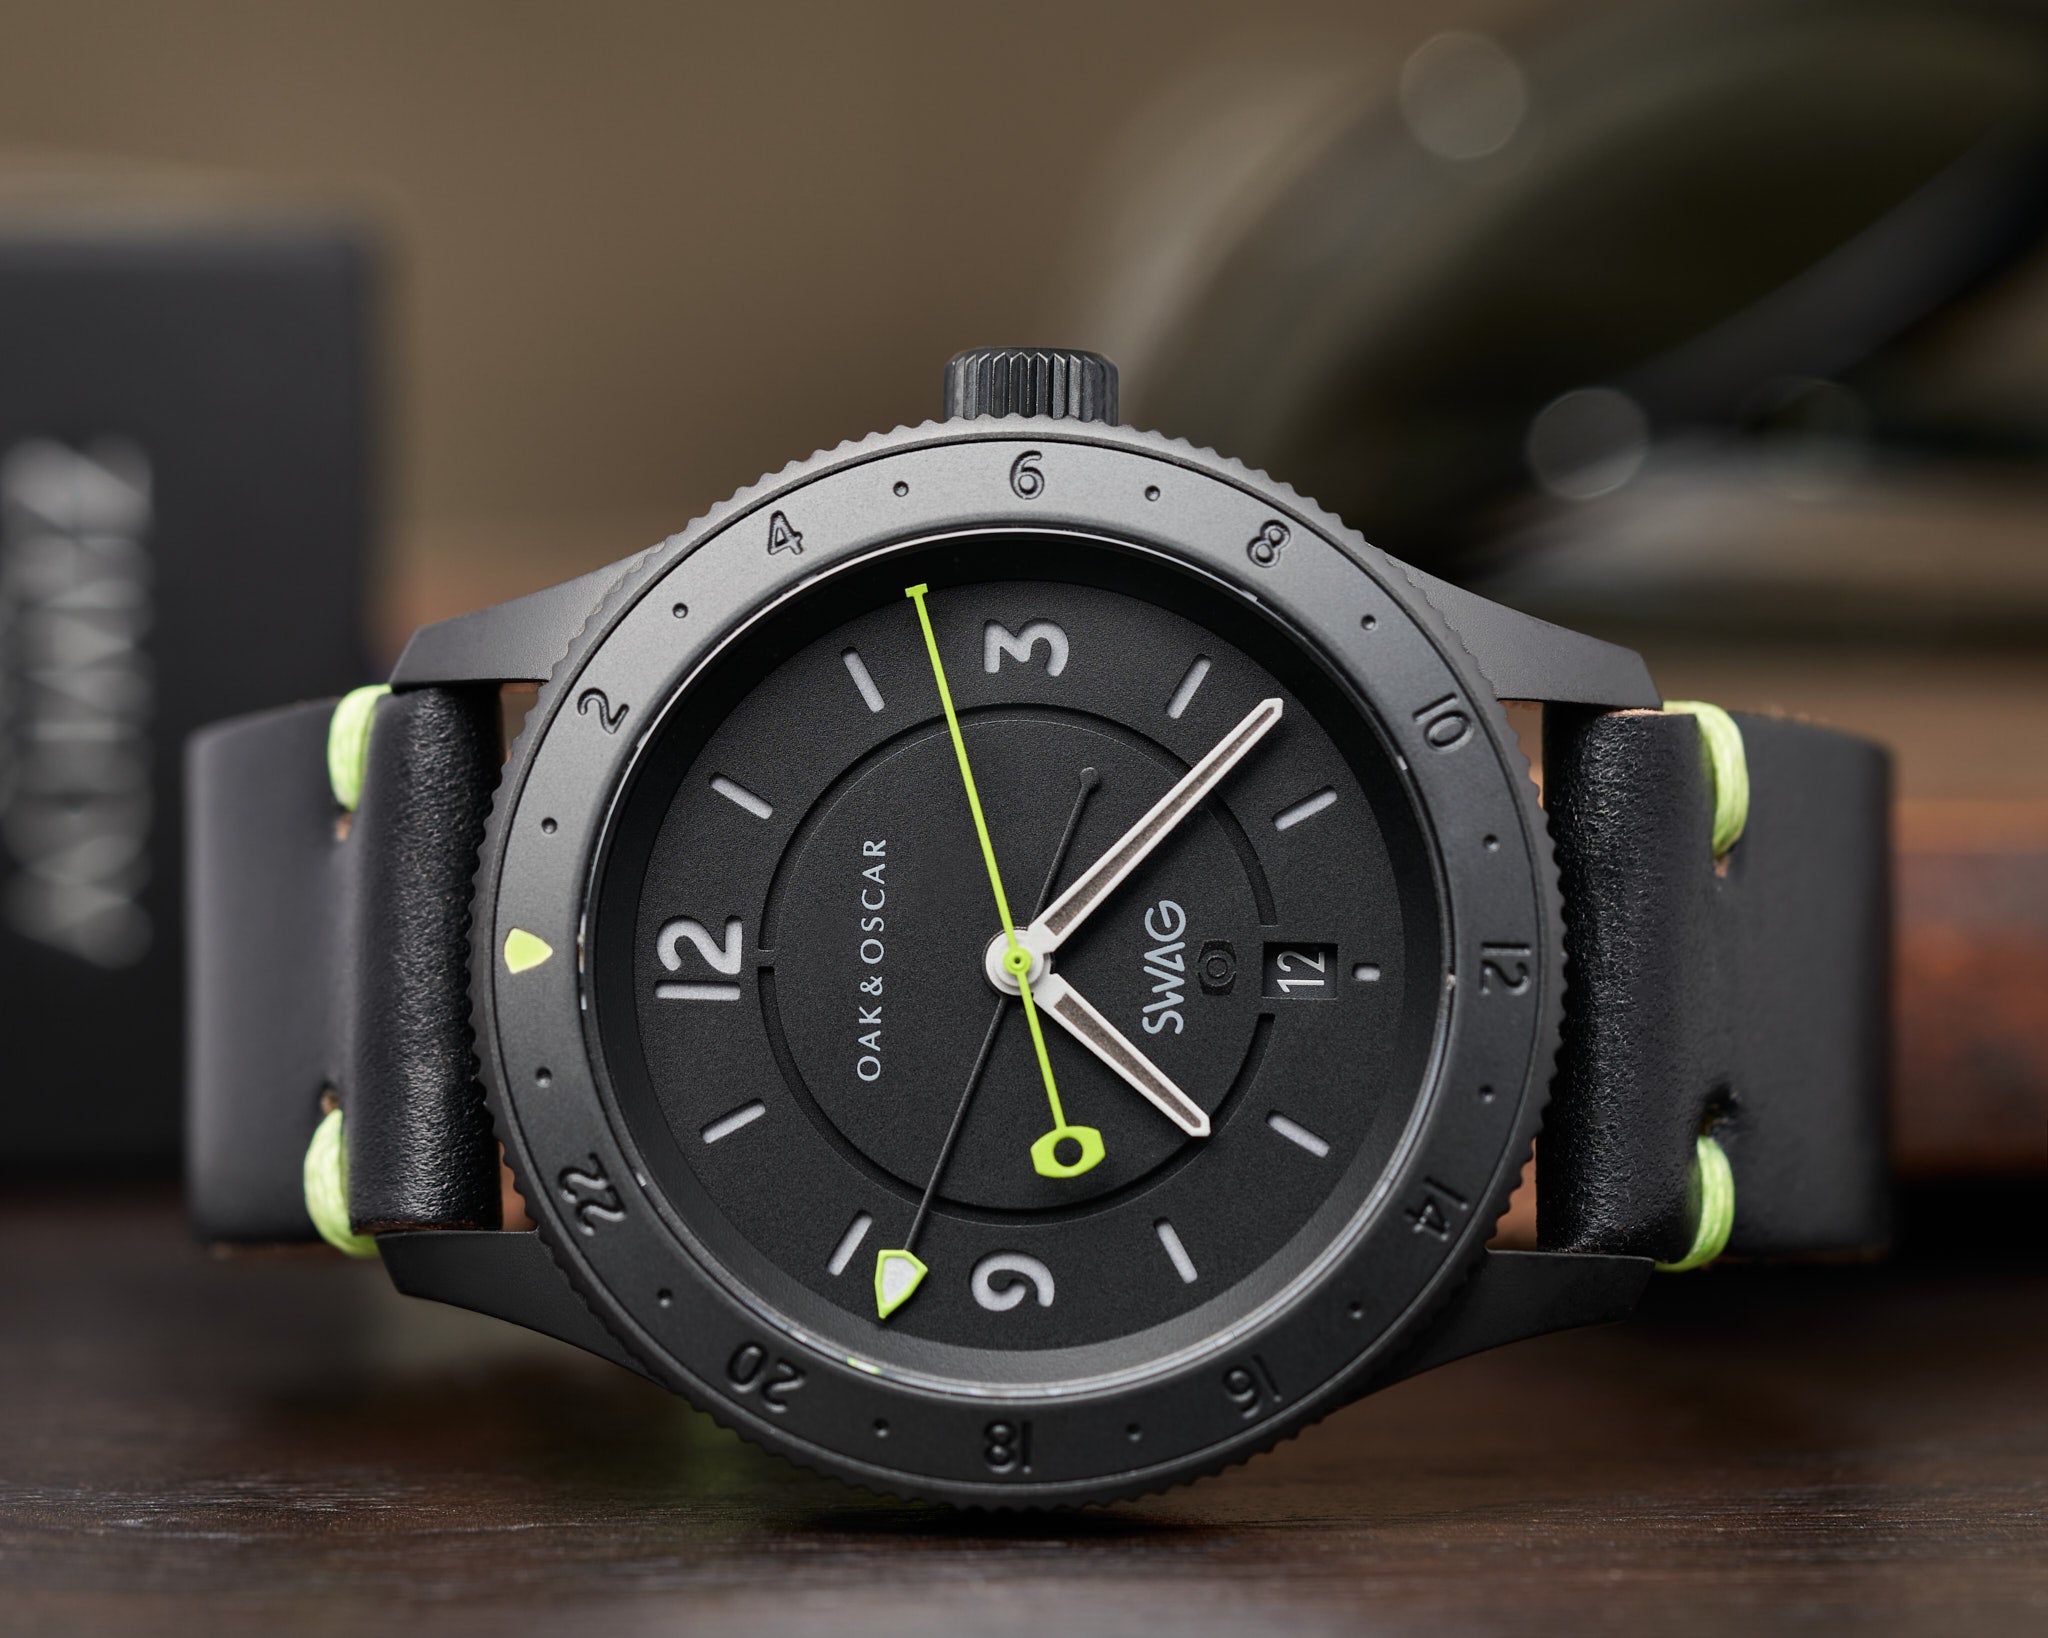 Image of dark black watch with green seconds hand